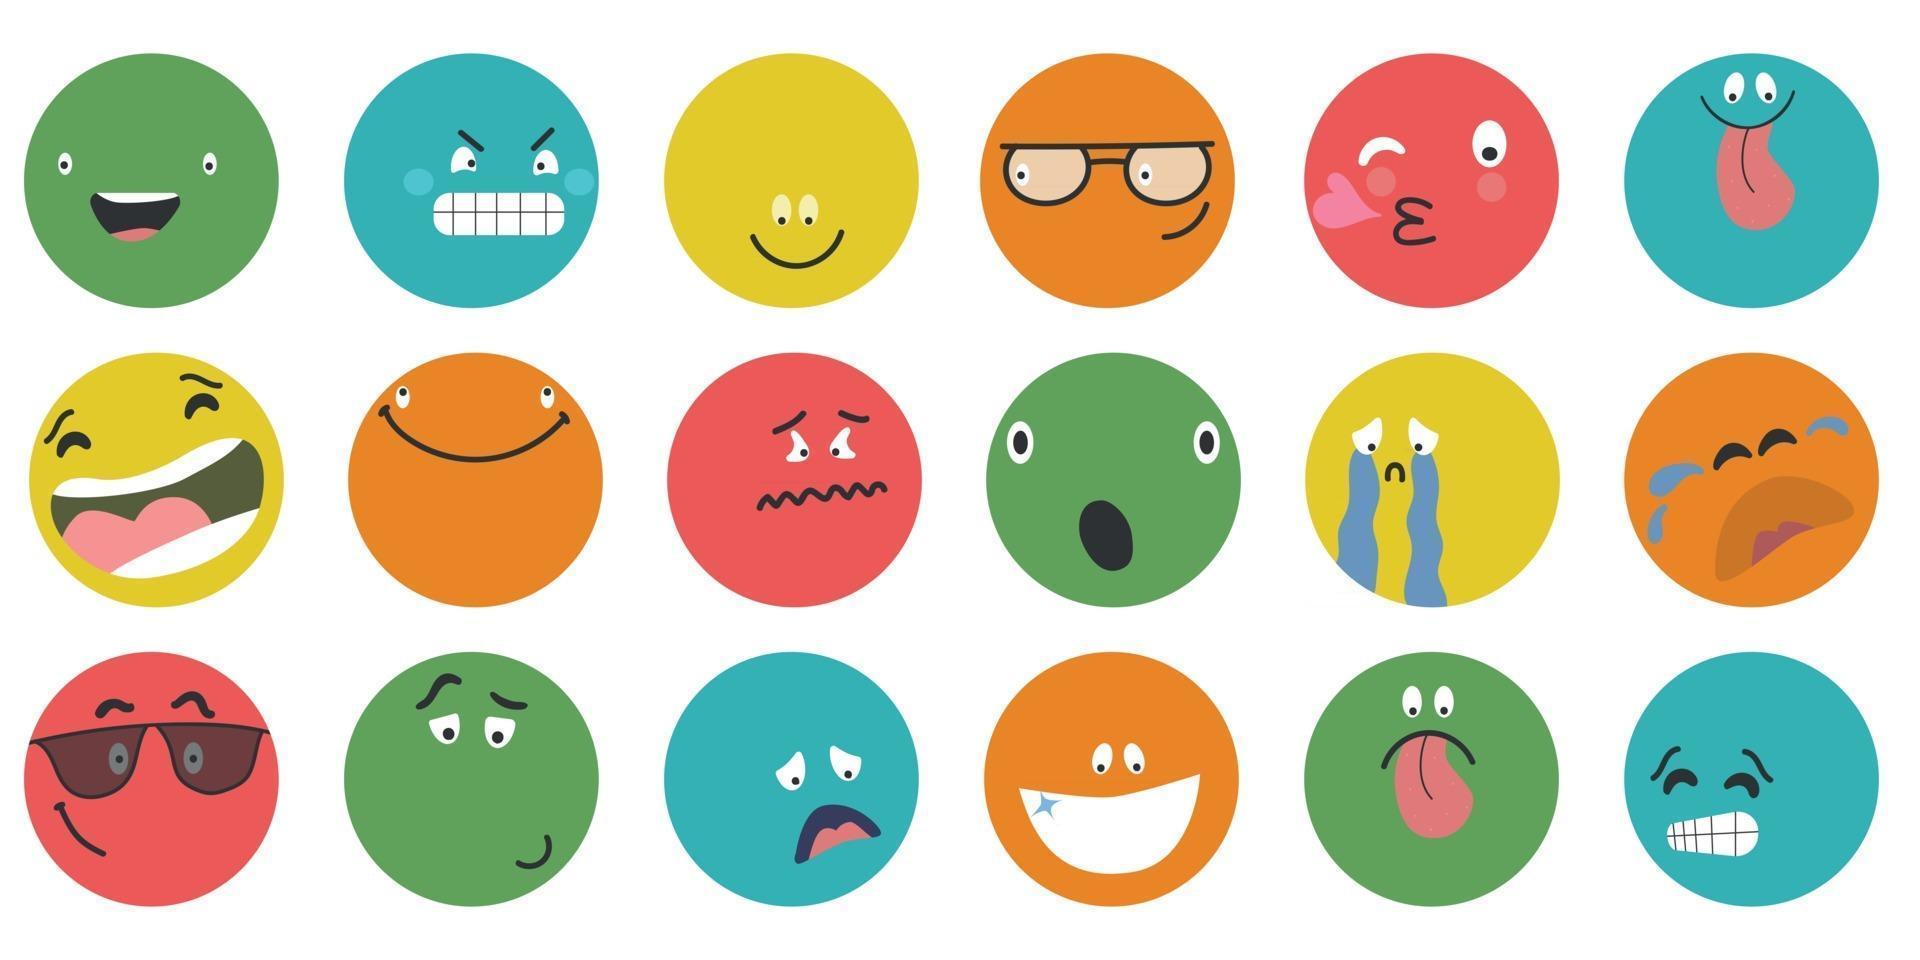 Round abstract comic Faces with various Emotions  Different colorful characters Cartoon style Flat design Emoticons set Emoji faces emoticon smile digital smiley expression emotion feelings chat messenger cartoon emotes vector